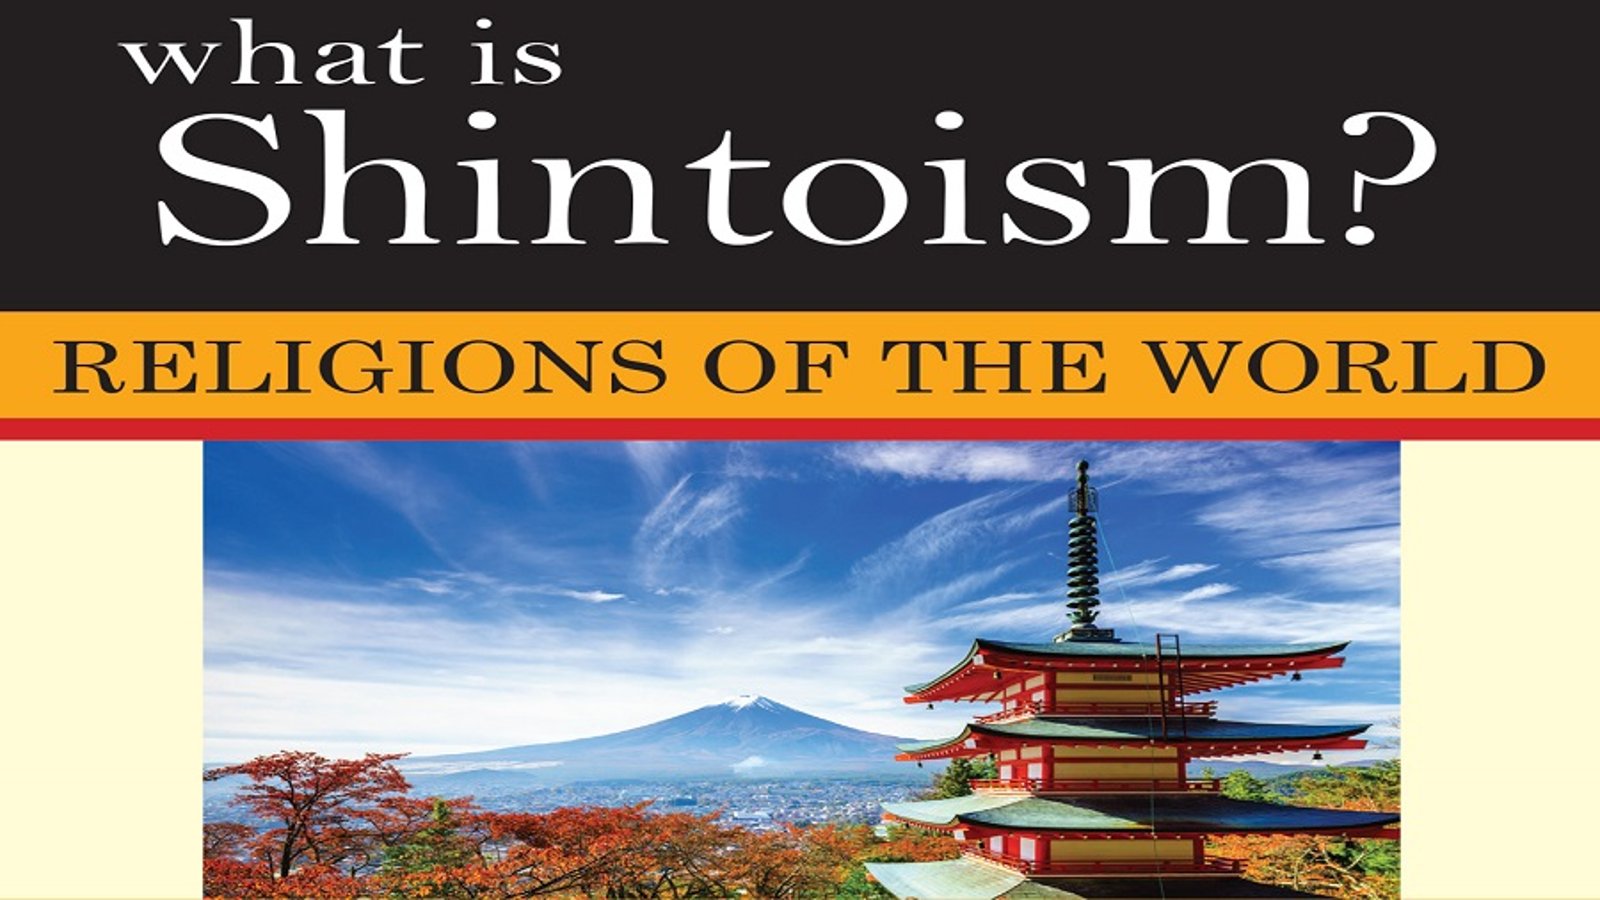 What is Shintoism?